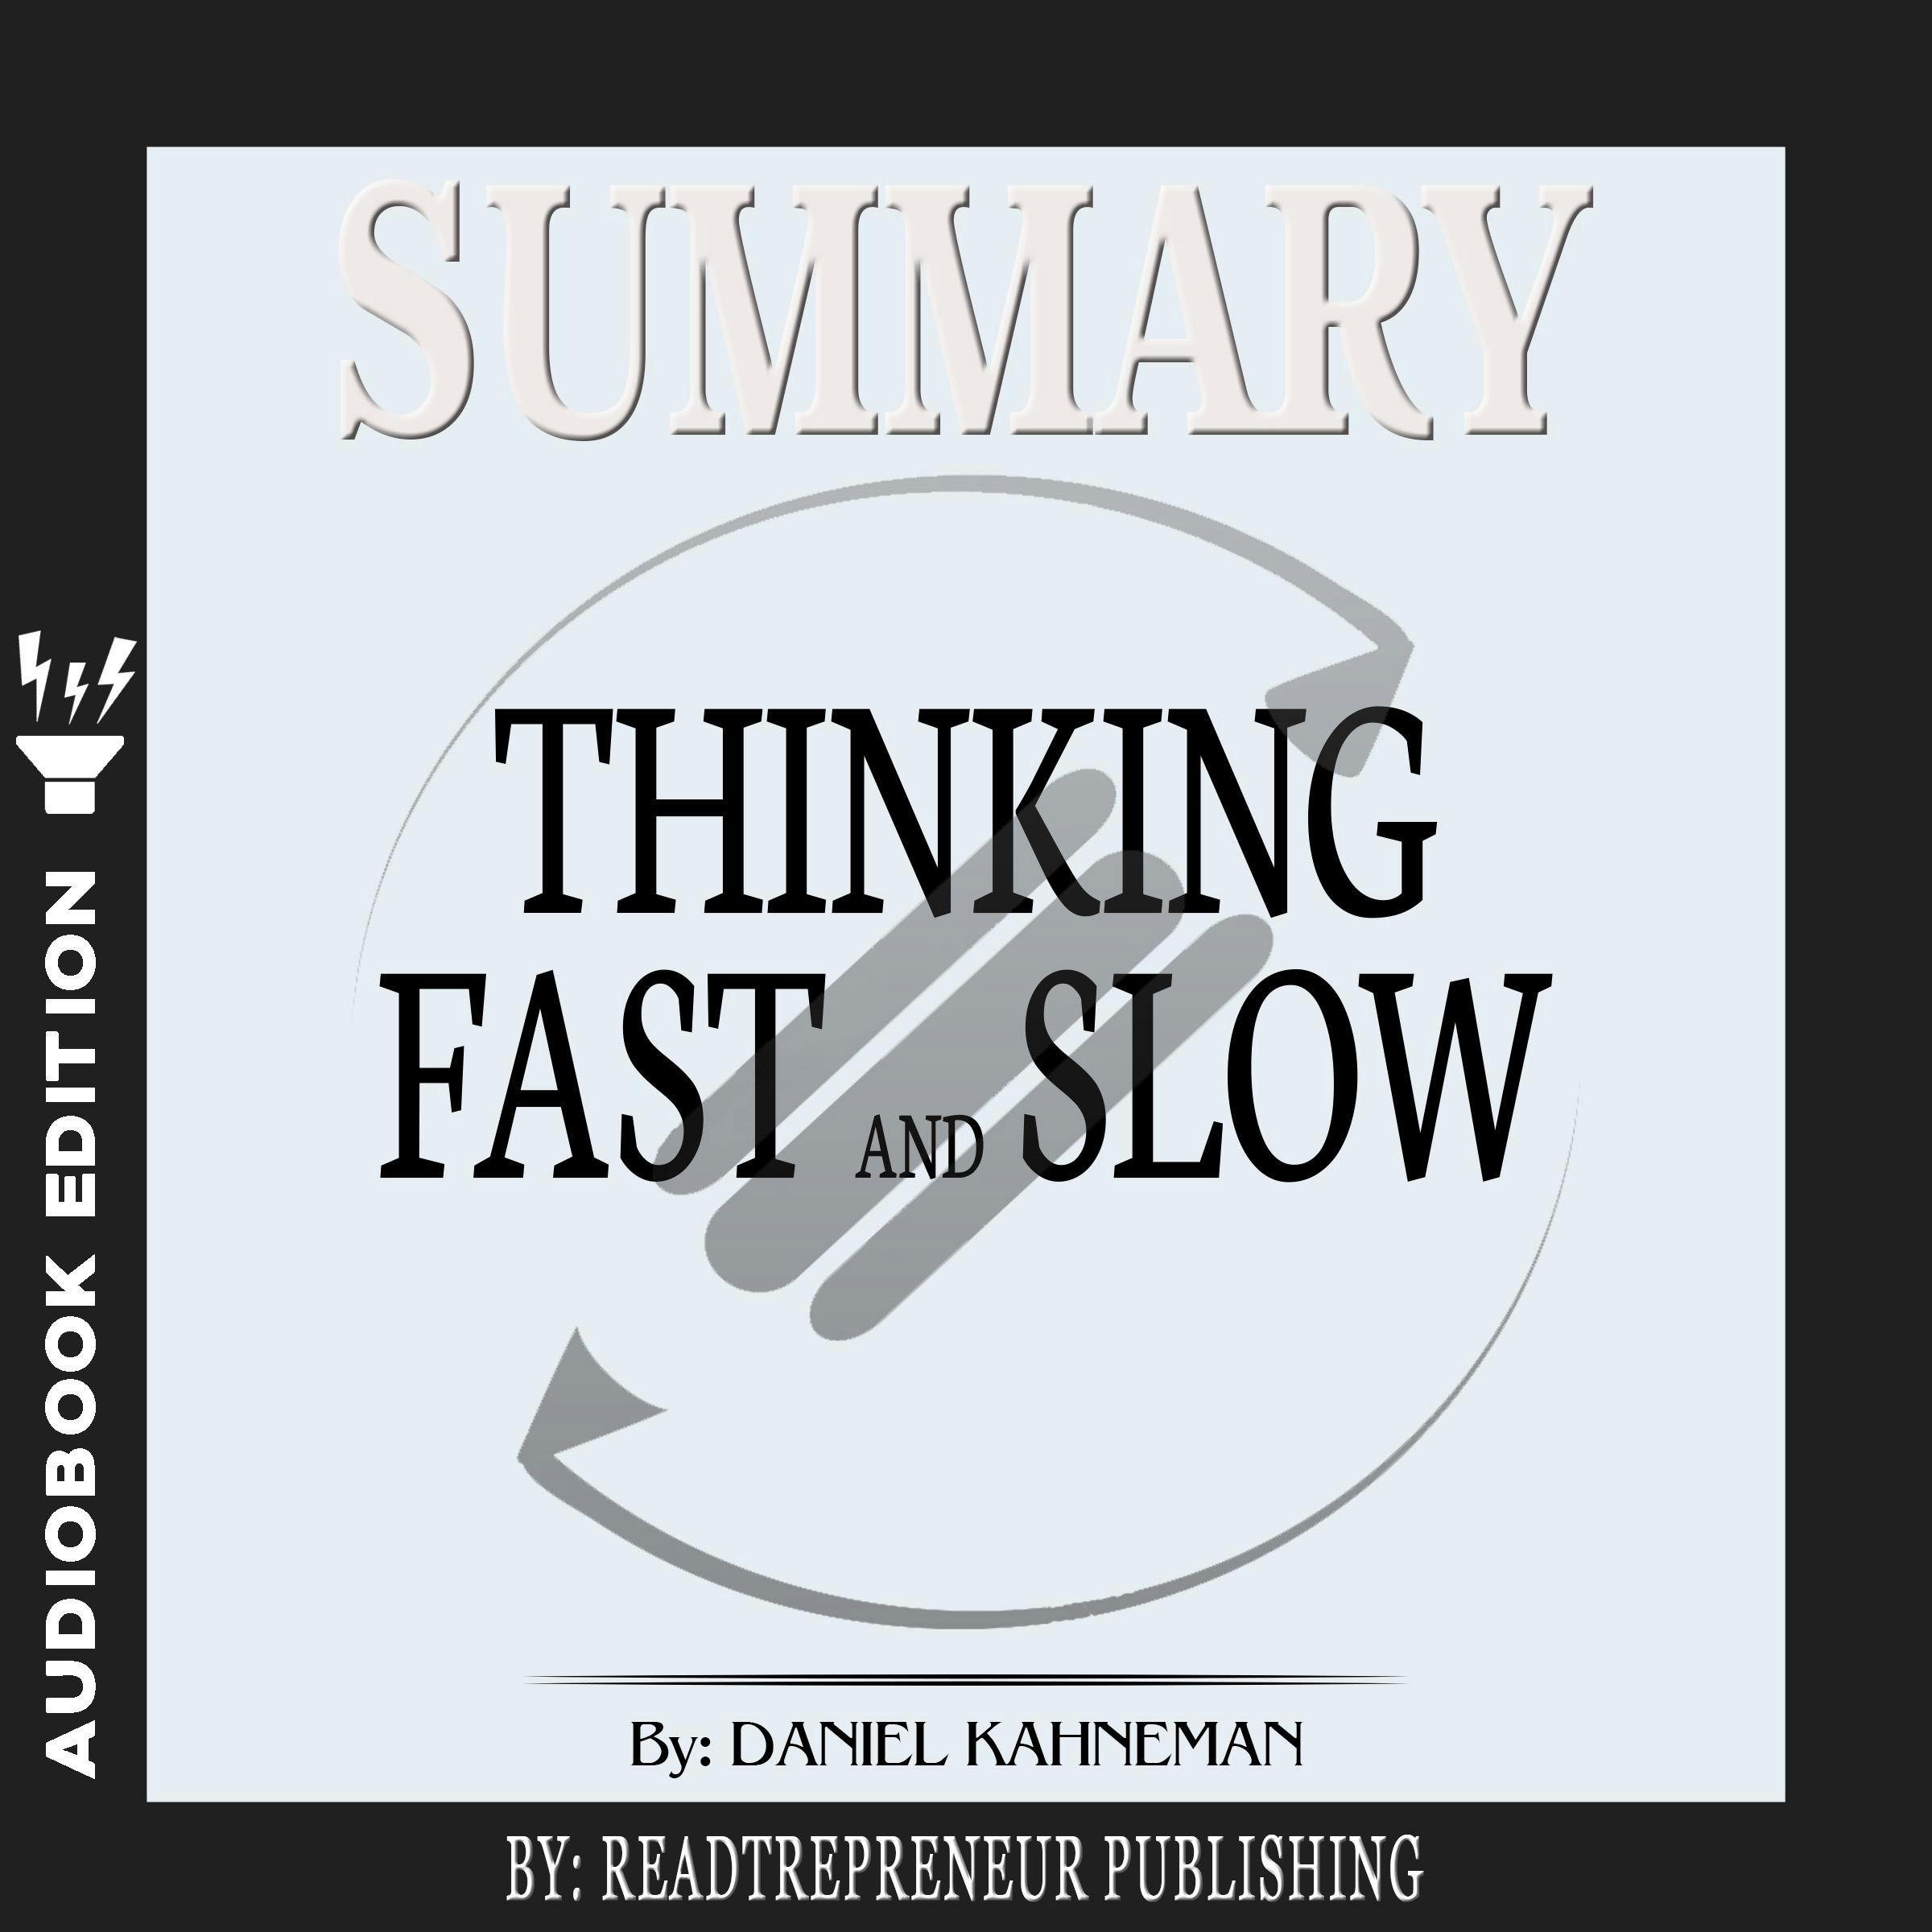 Thinking fast and slow by Daniel Kahneman [Audiobook] 